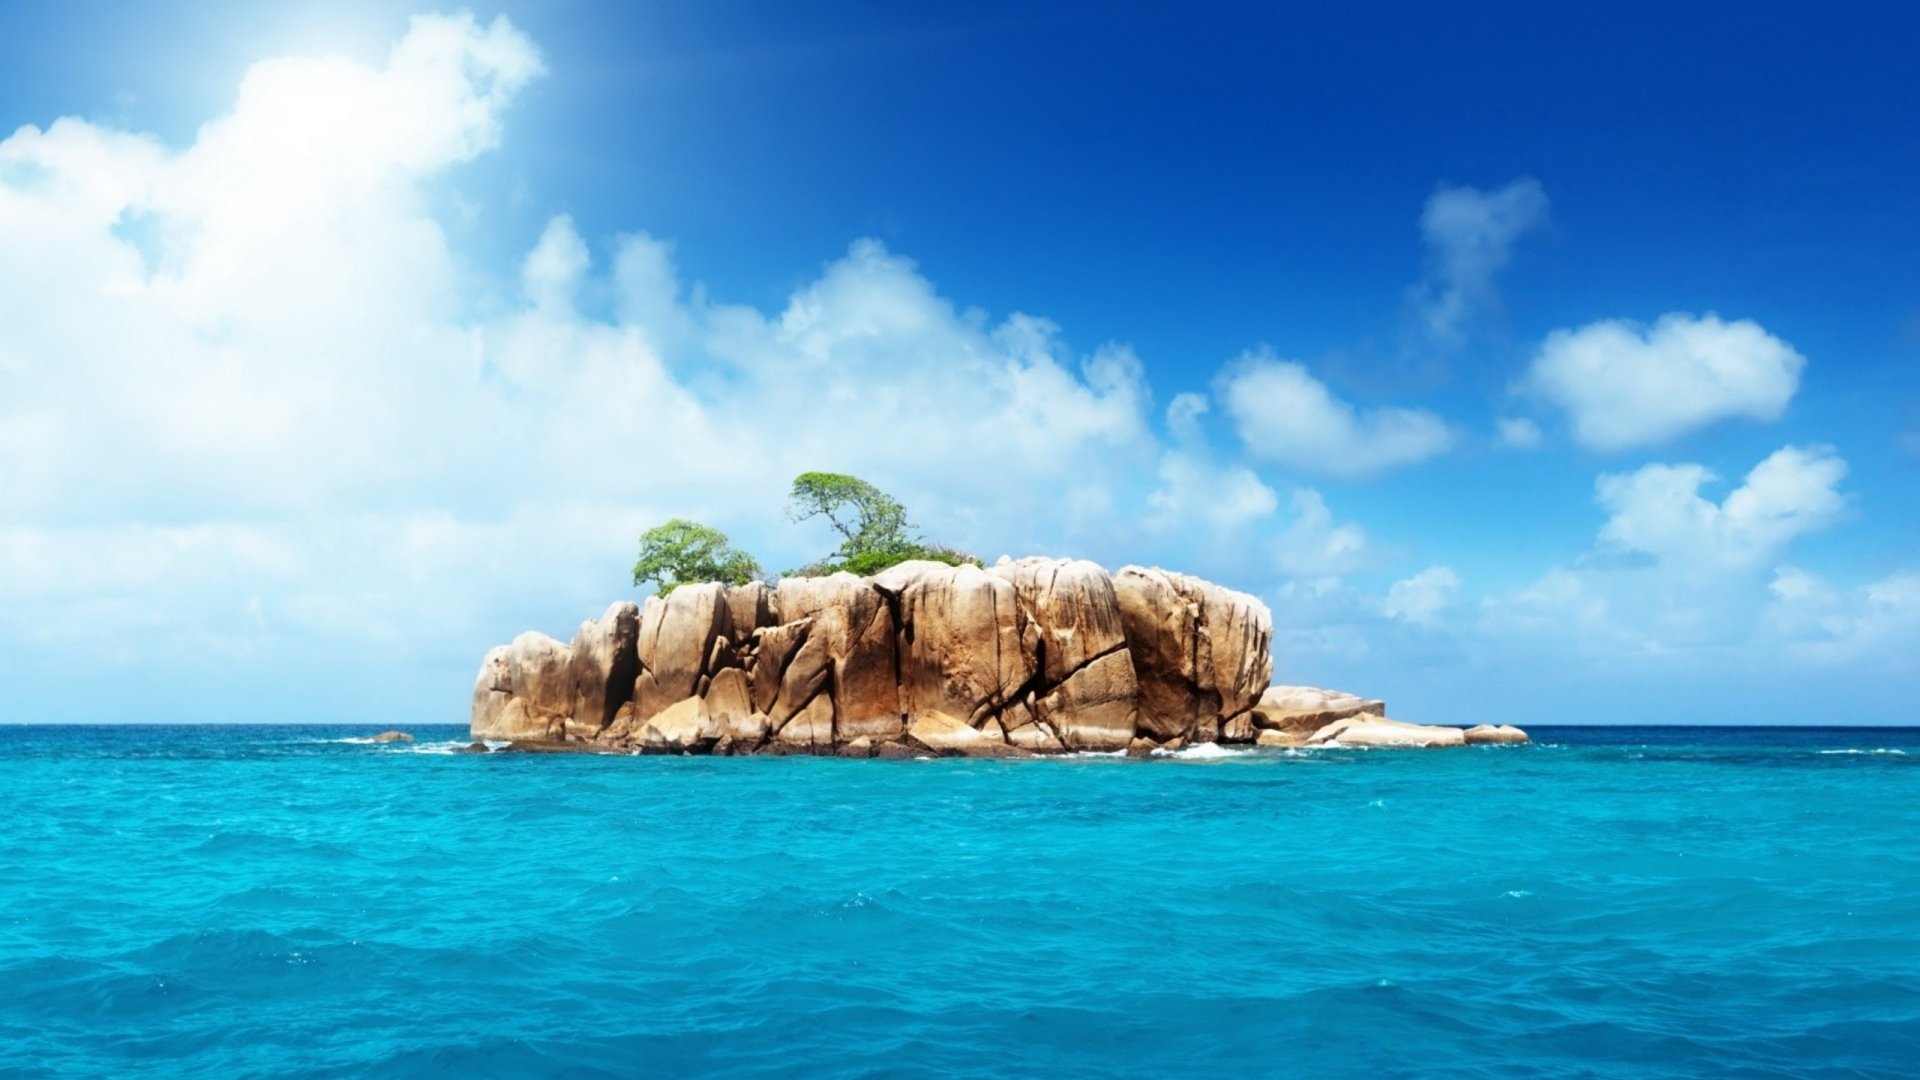 The Most Beautiful Island Ever Wallpaper - Most Beautiful Island 4k - HD Wallpaper 